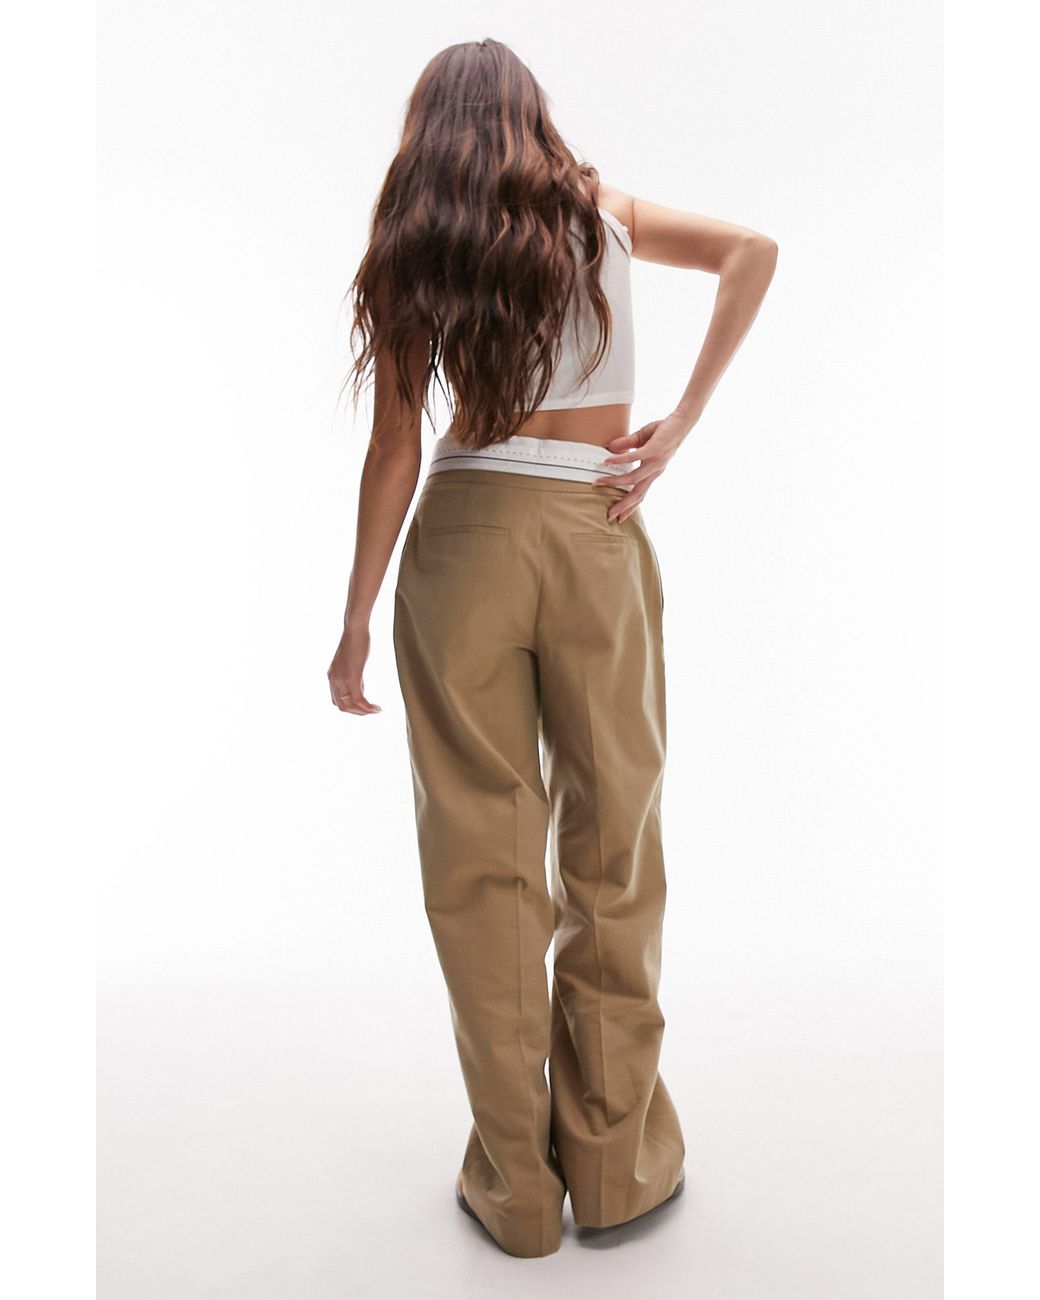 Topshop wide leg trousers – by Hannah Rochell